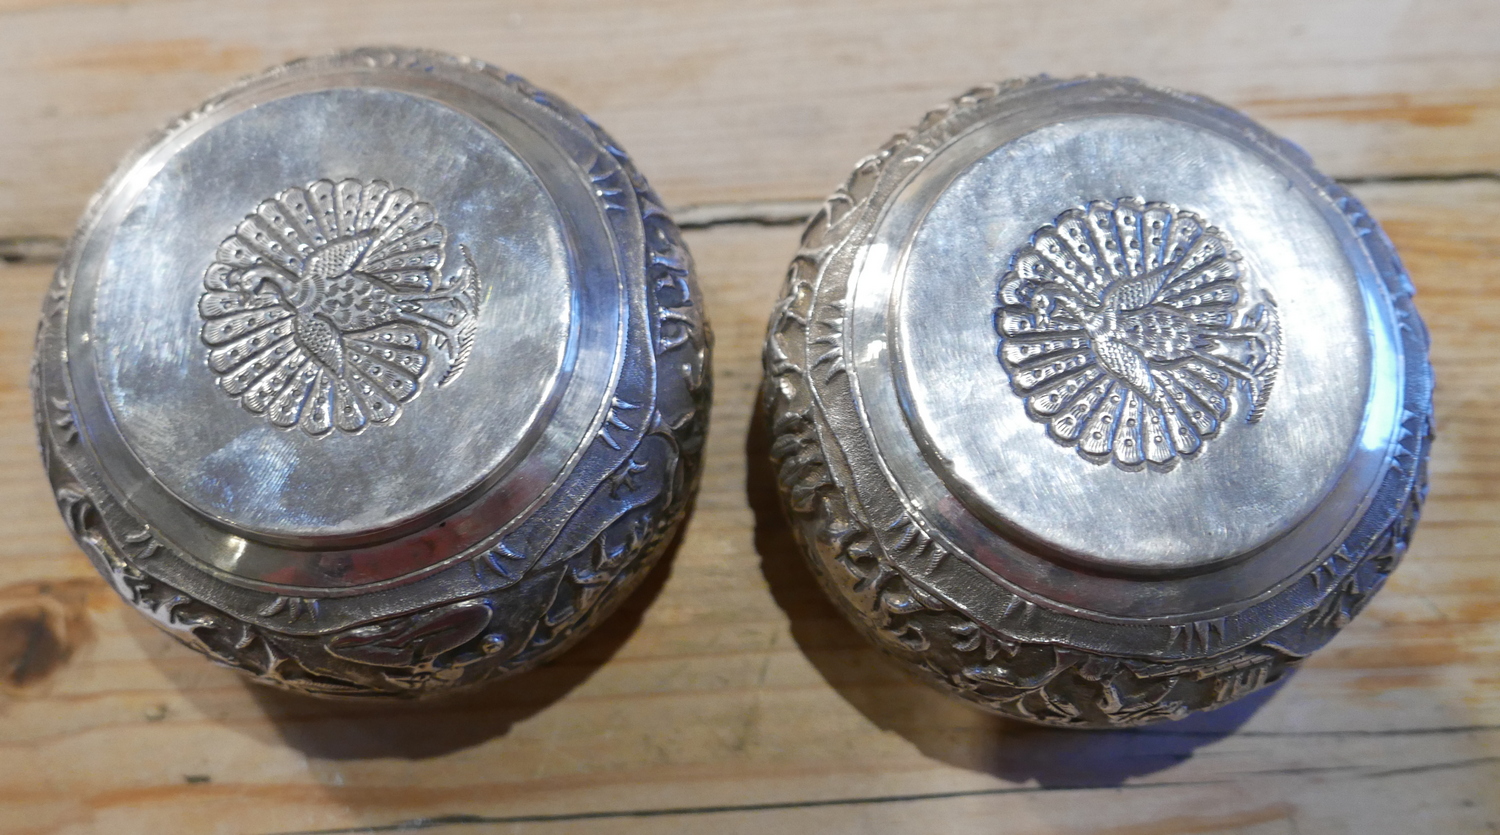 Antique Pair of Indian/Burmese White Metal Bowls with Peacock Marks to base - 233 grams. - Image 8 of 8